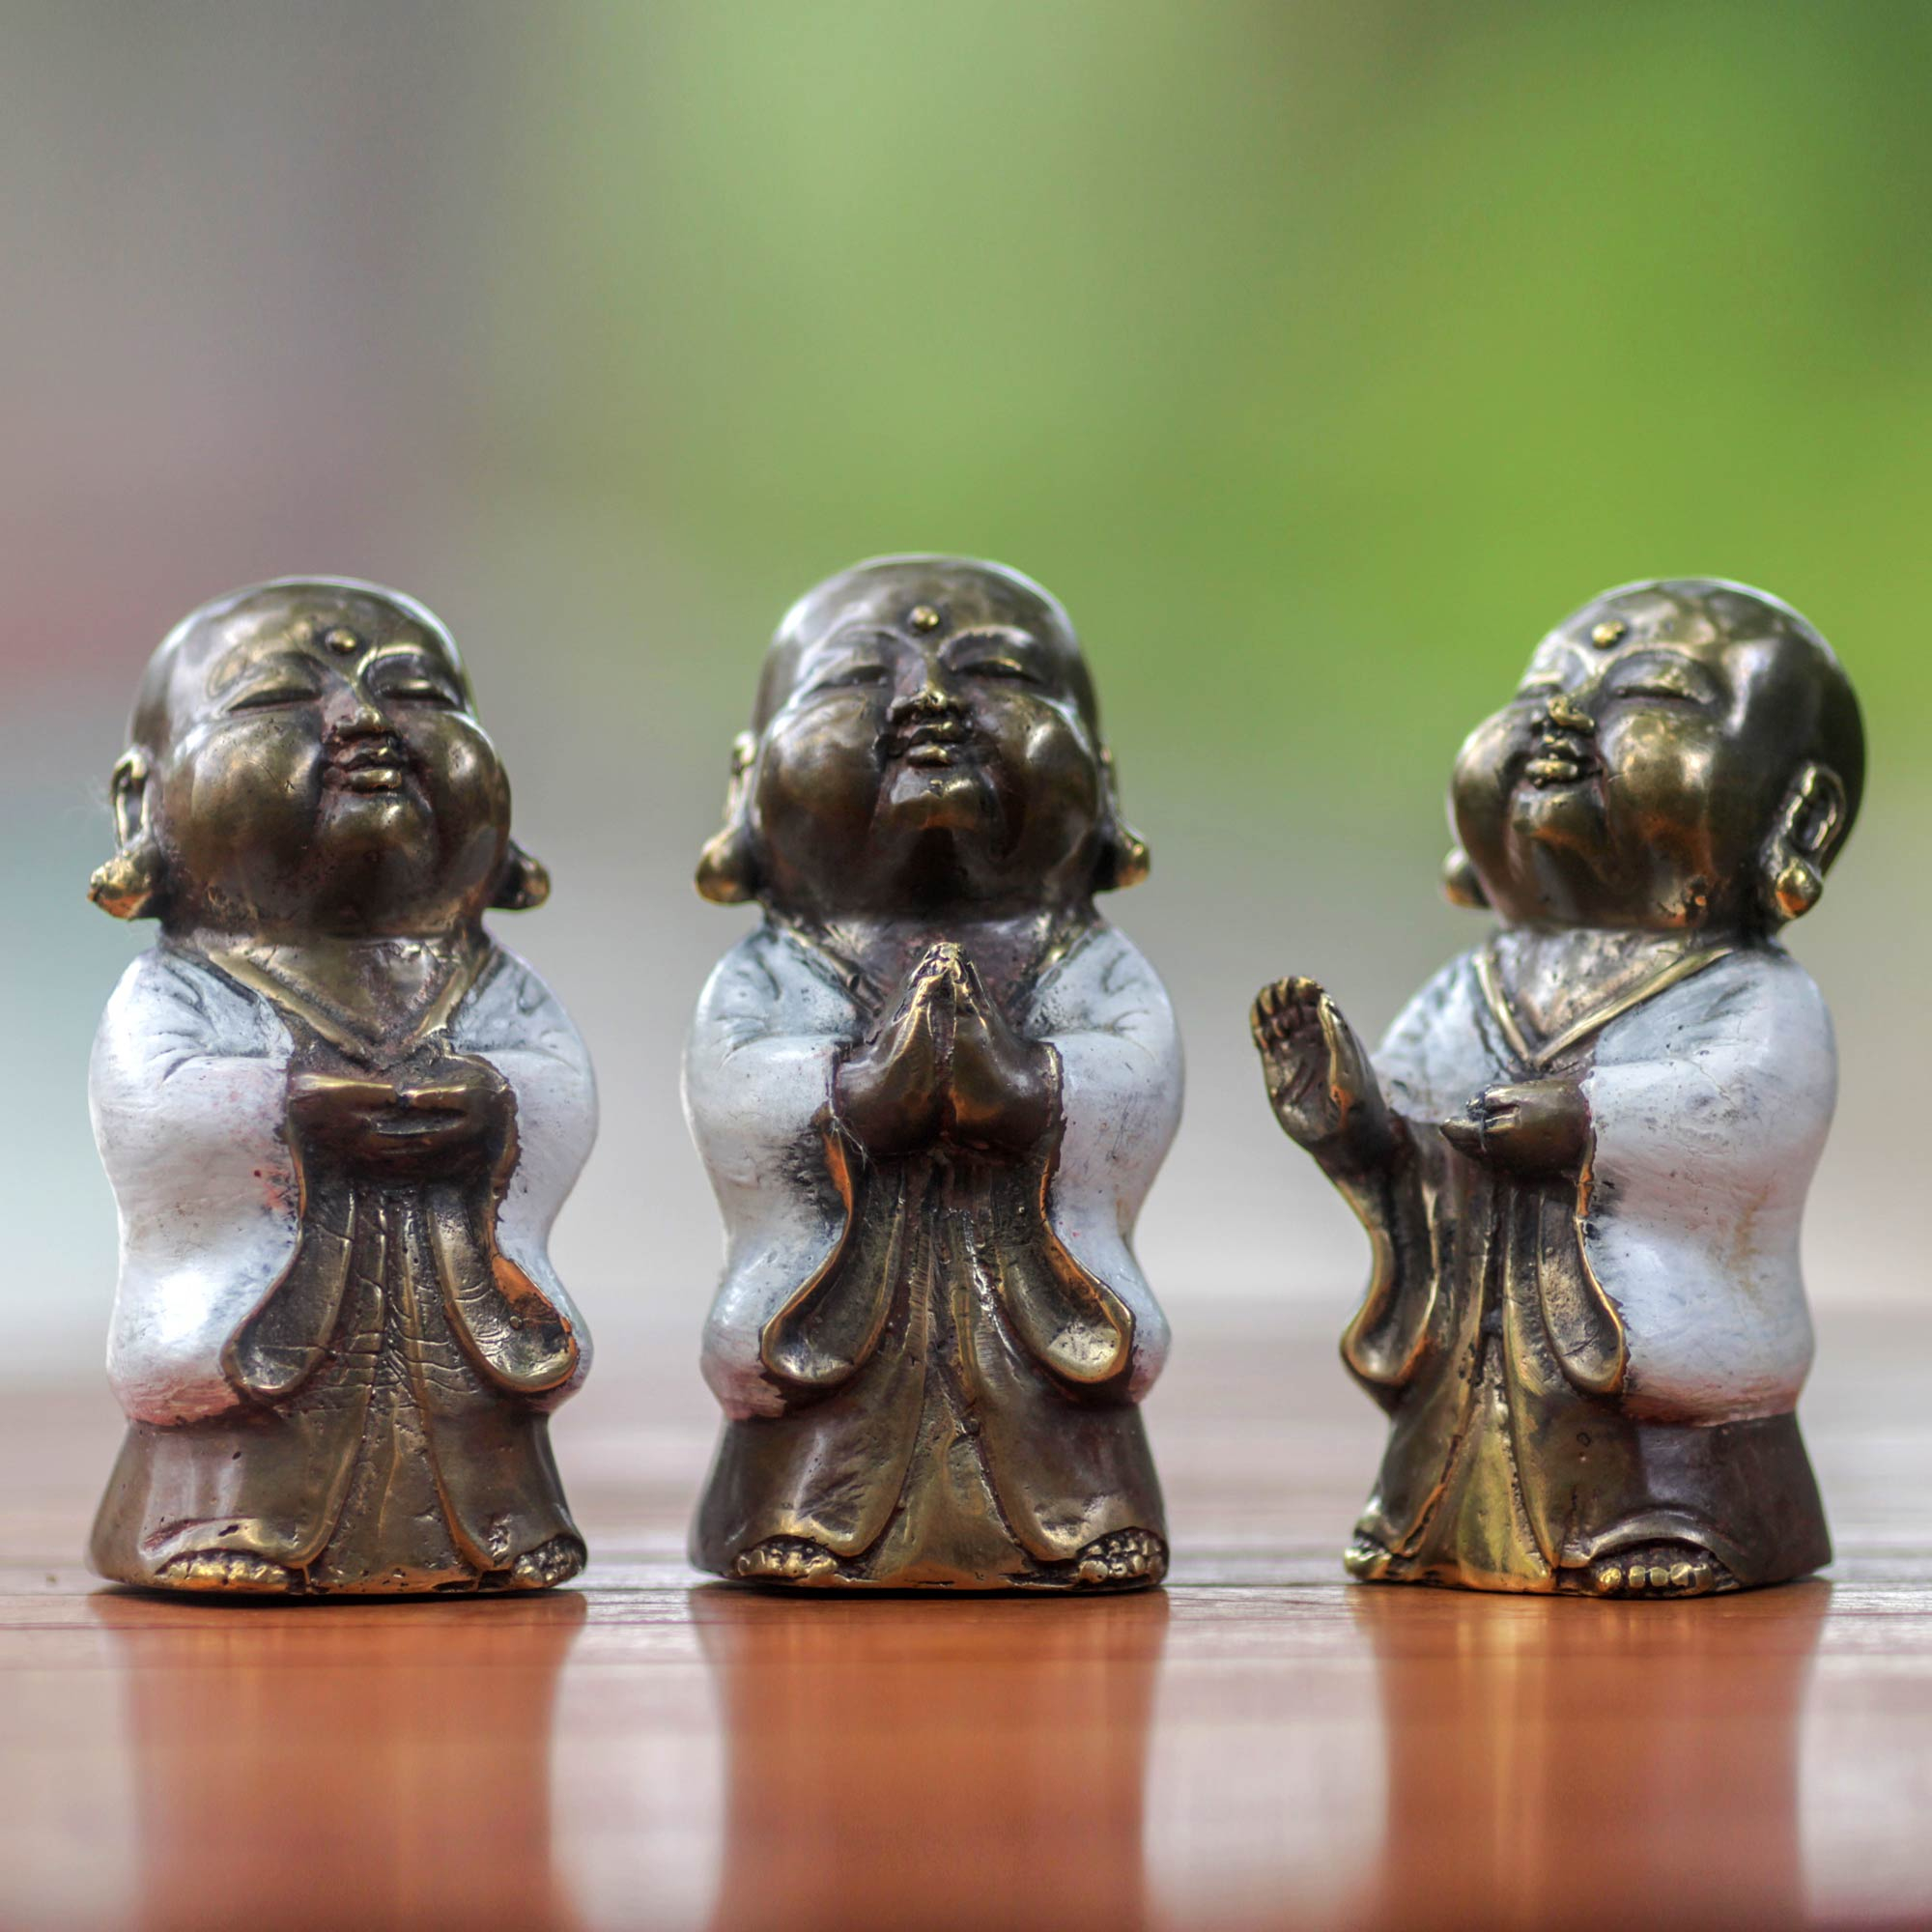 Three Antique Style Bronze Buddha Images from Bali - Little Buddha in White  | NOVICA